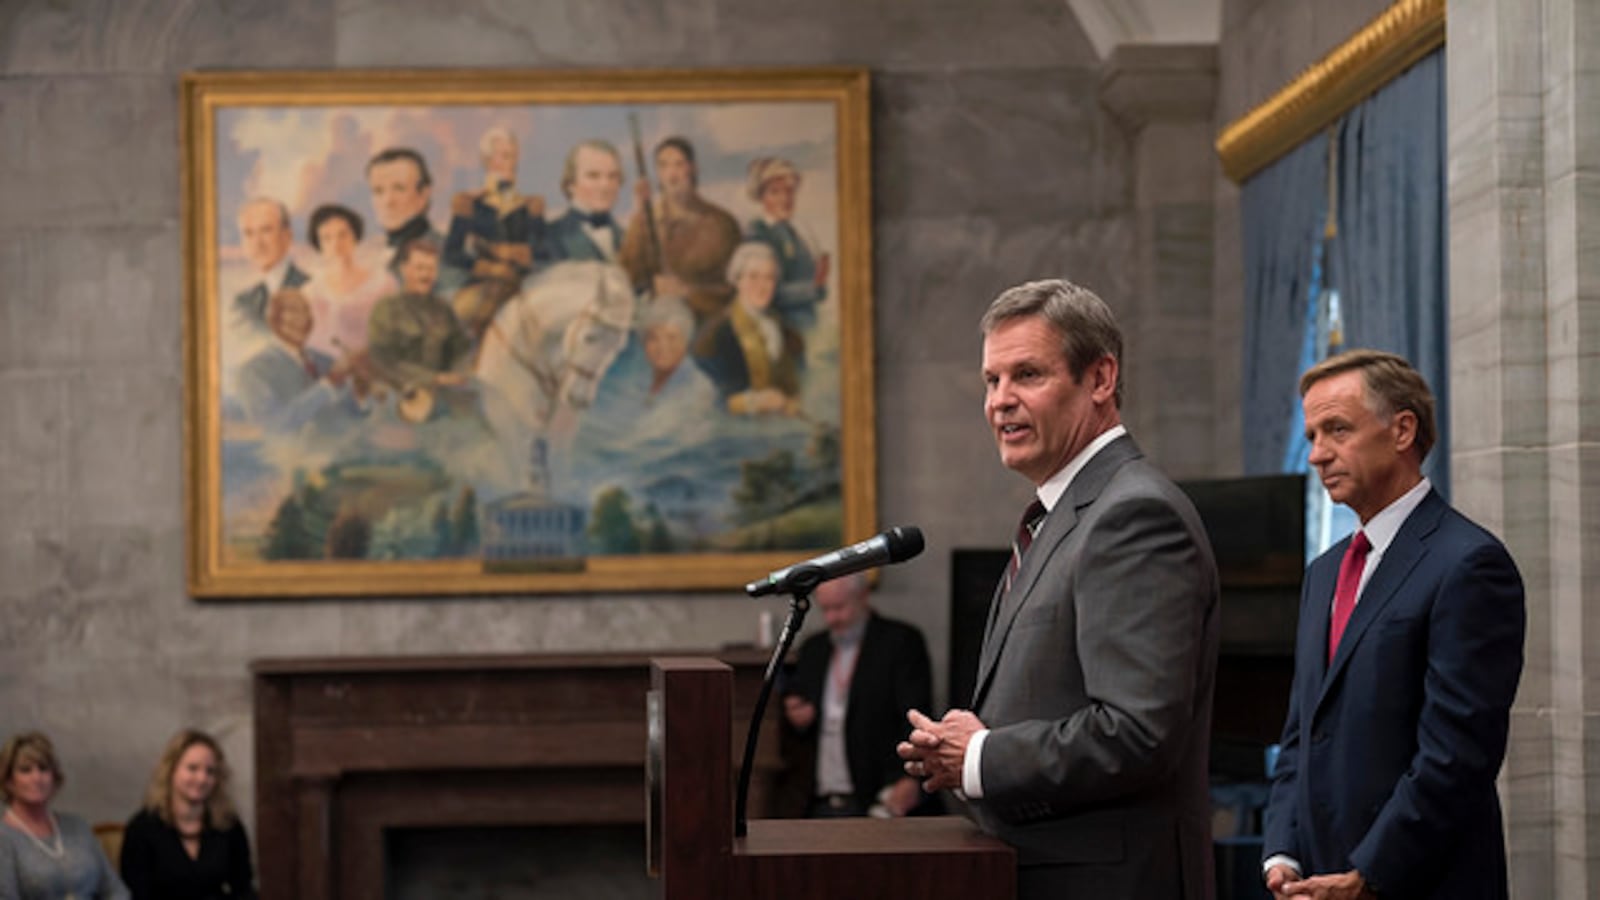 As outgoing Gov. Bill Haslam looks on, Gov.-elect Bill Lee speaks at the state Capitol the day after being elected the 50th governor of Tennessee.